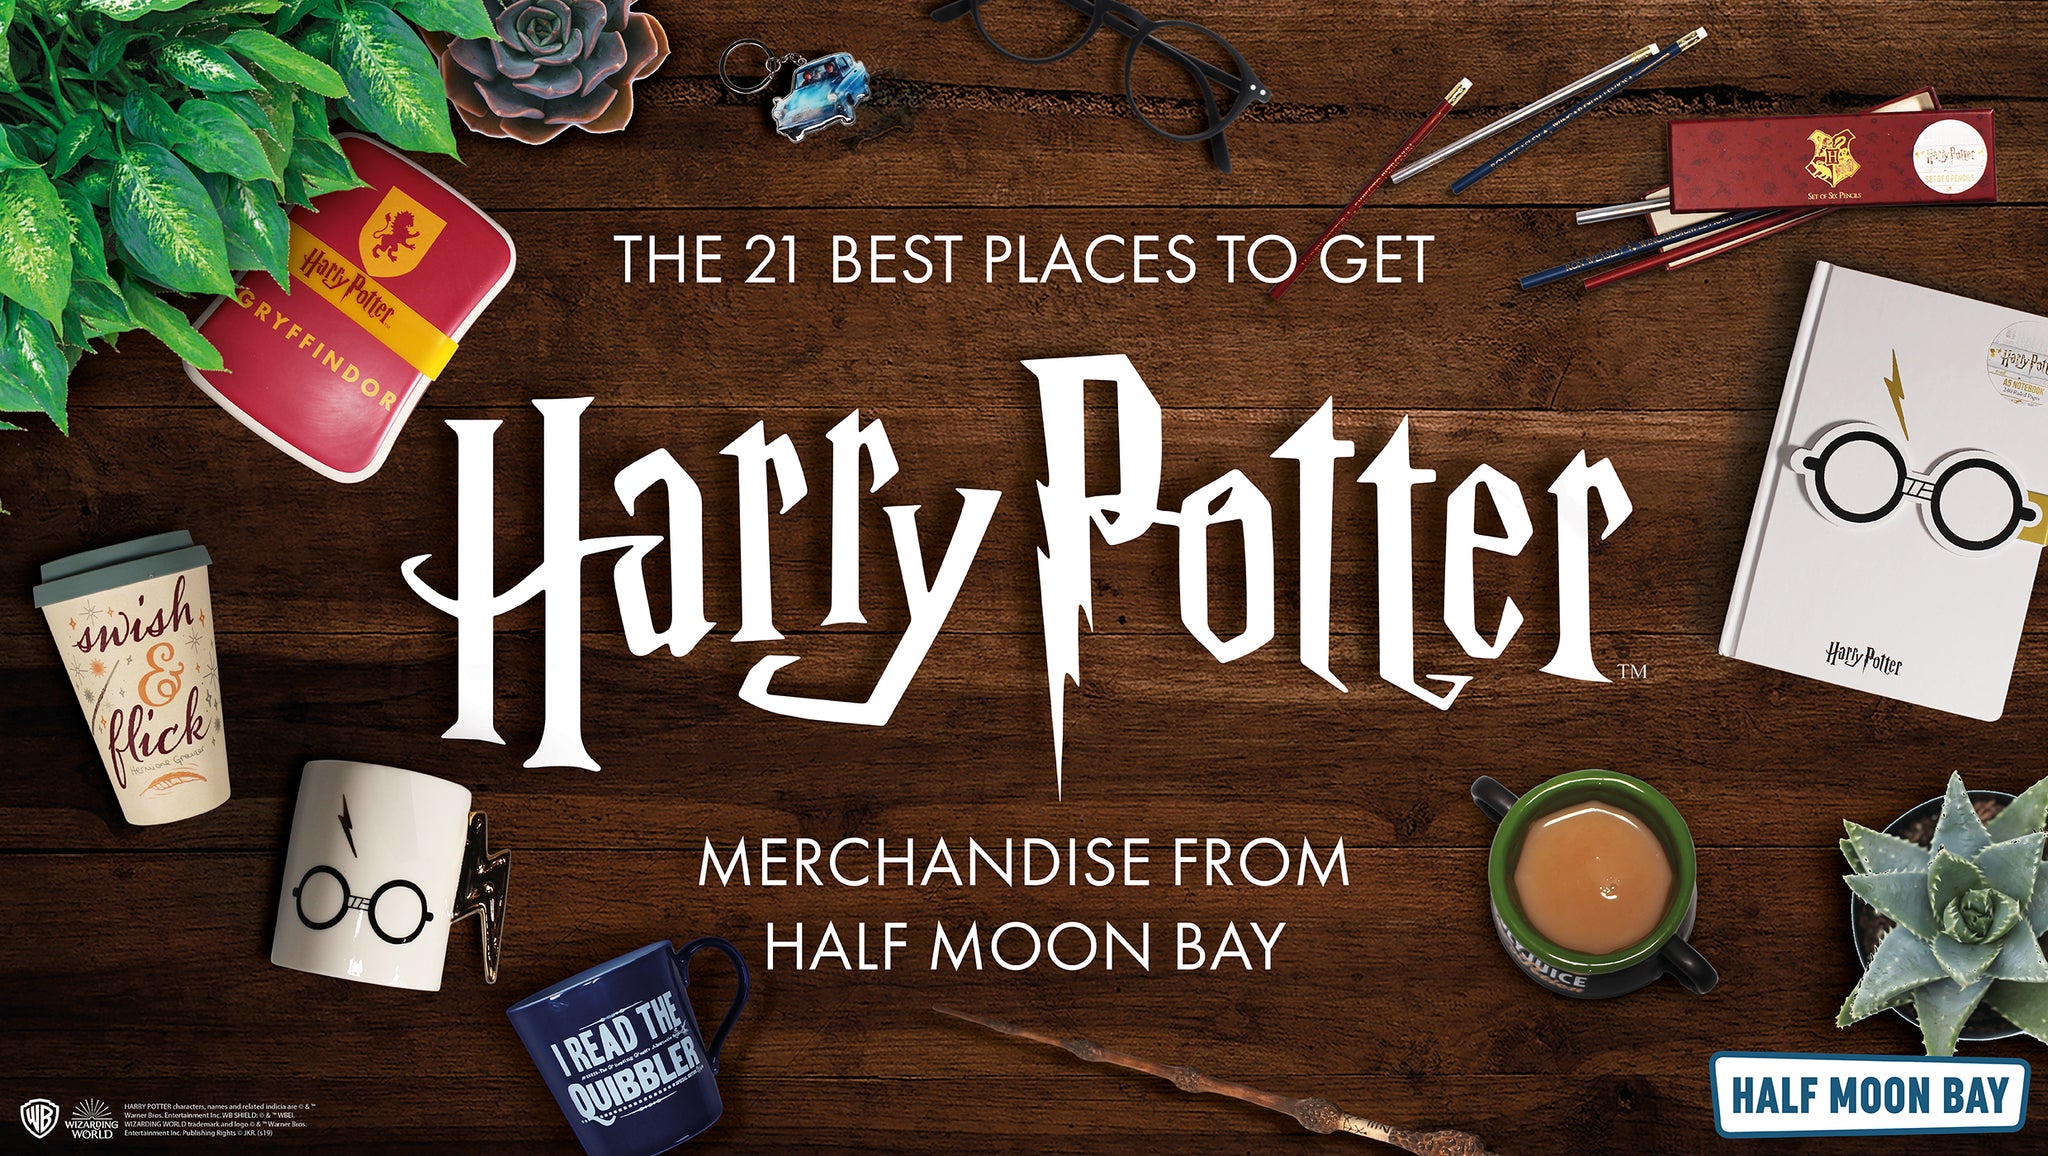 The Amazing Harry Potter Shops You Won’t Find on Diagon Alley